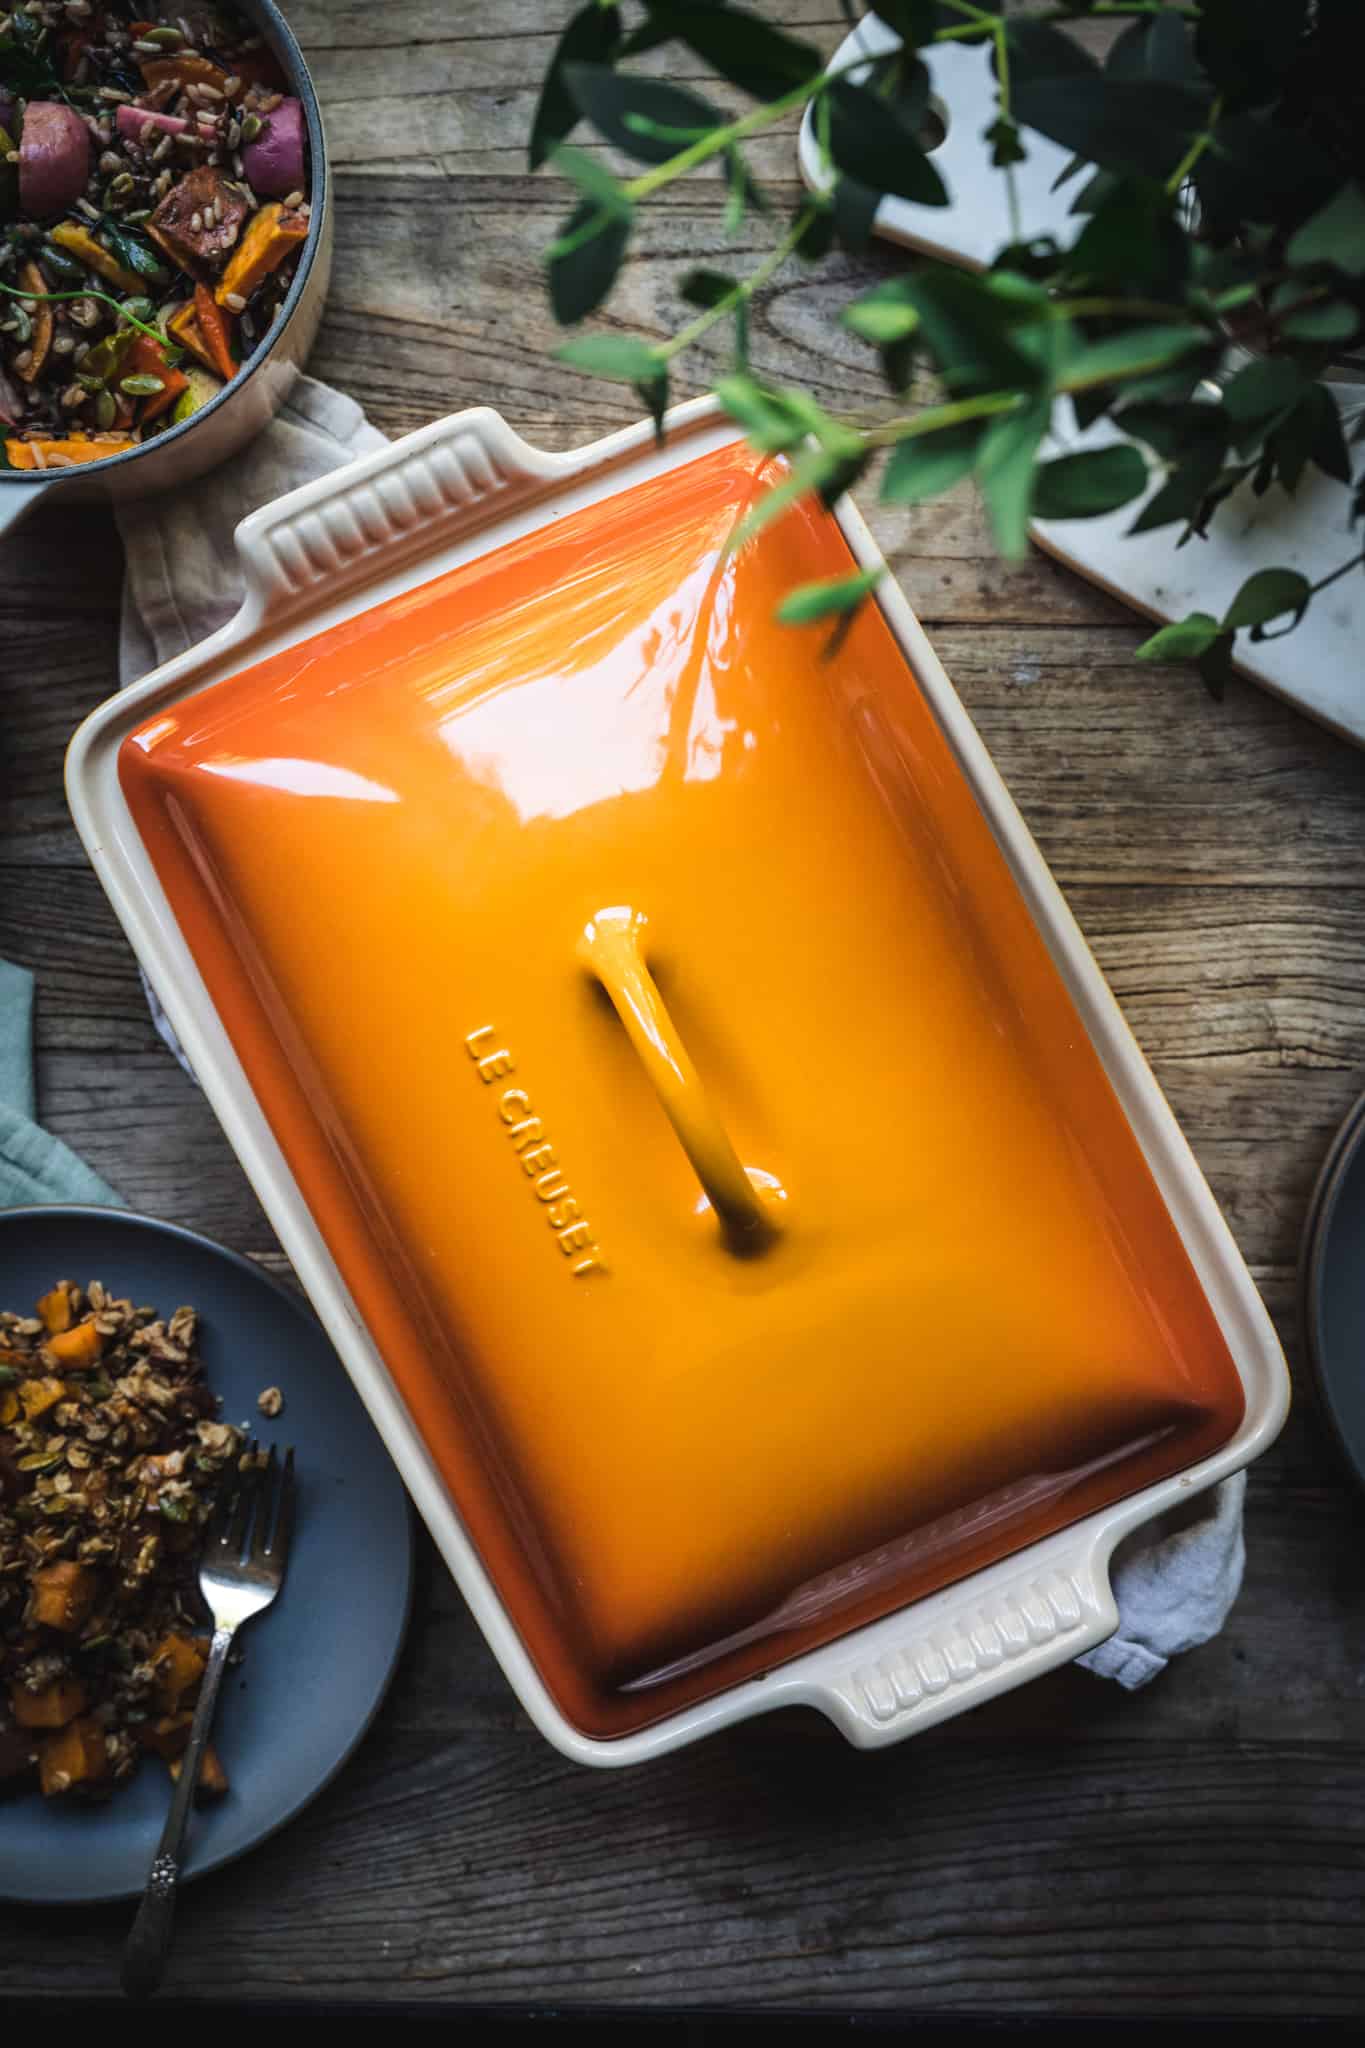 Overhead view of beautiful orange casserole dish from Le Creuset